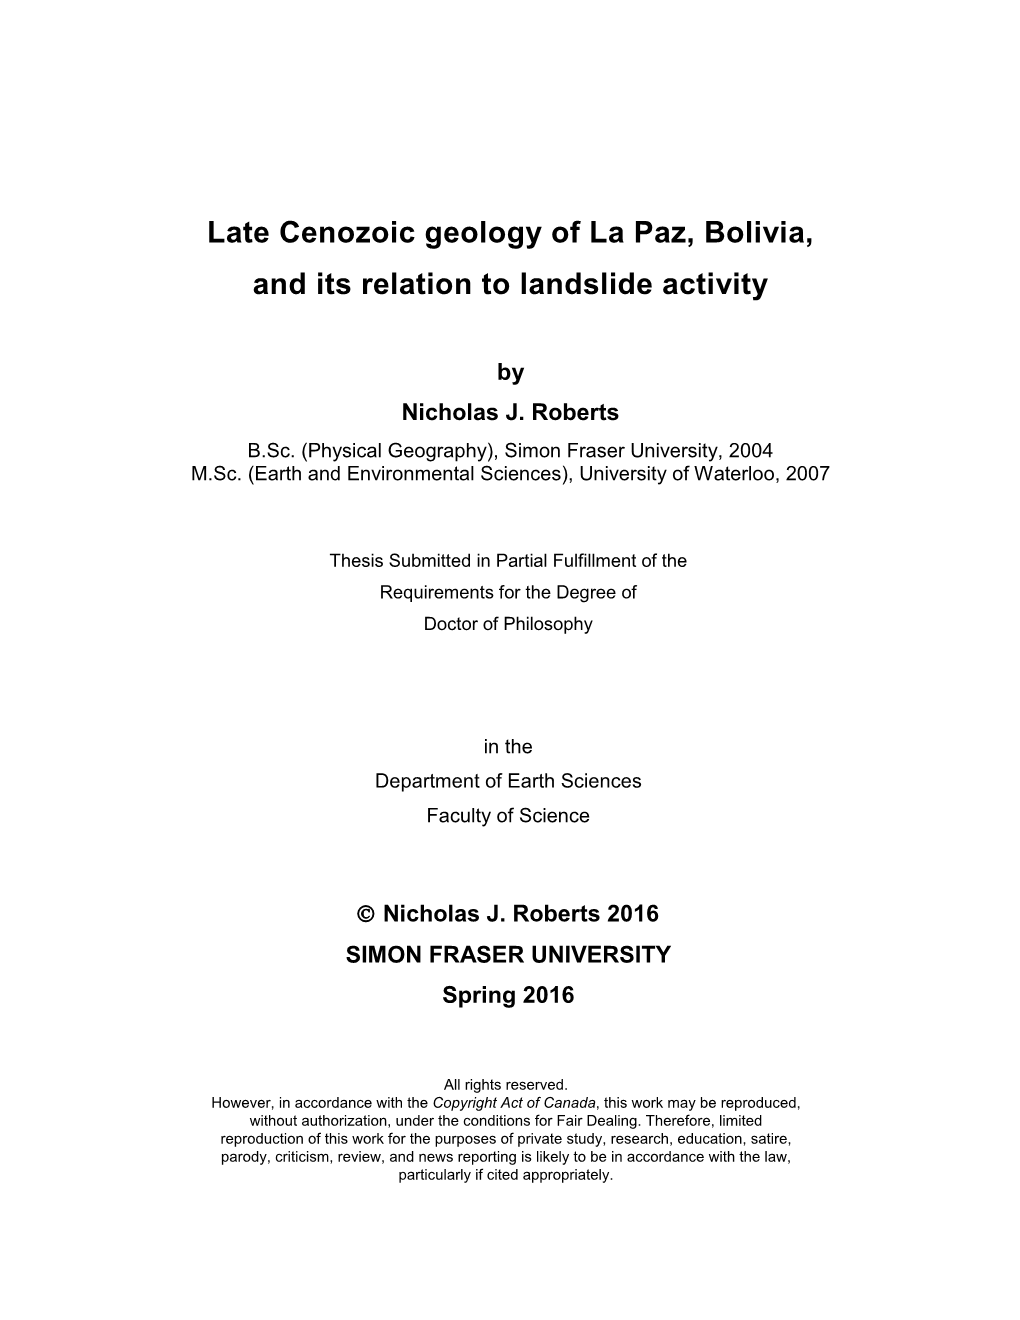 Late Cenozoic Geology of La Paz, Bolivia, and Its Relation to Landslide Activity